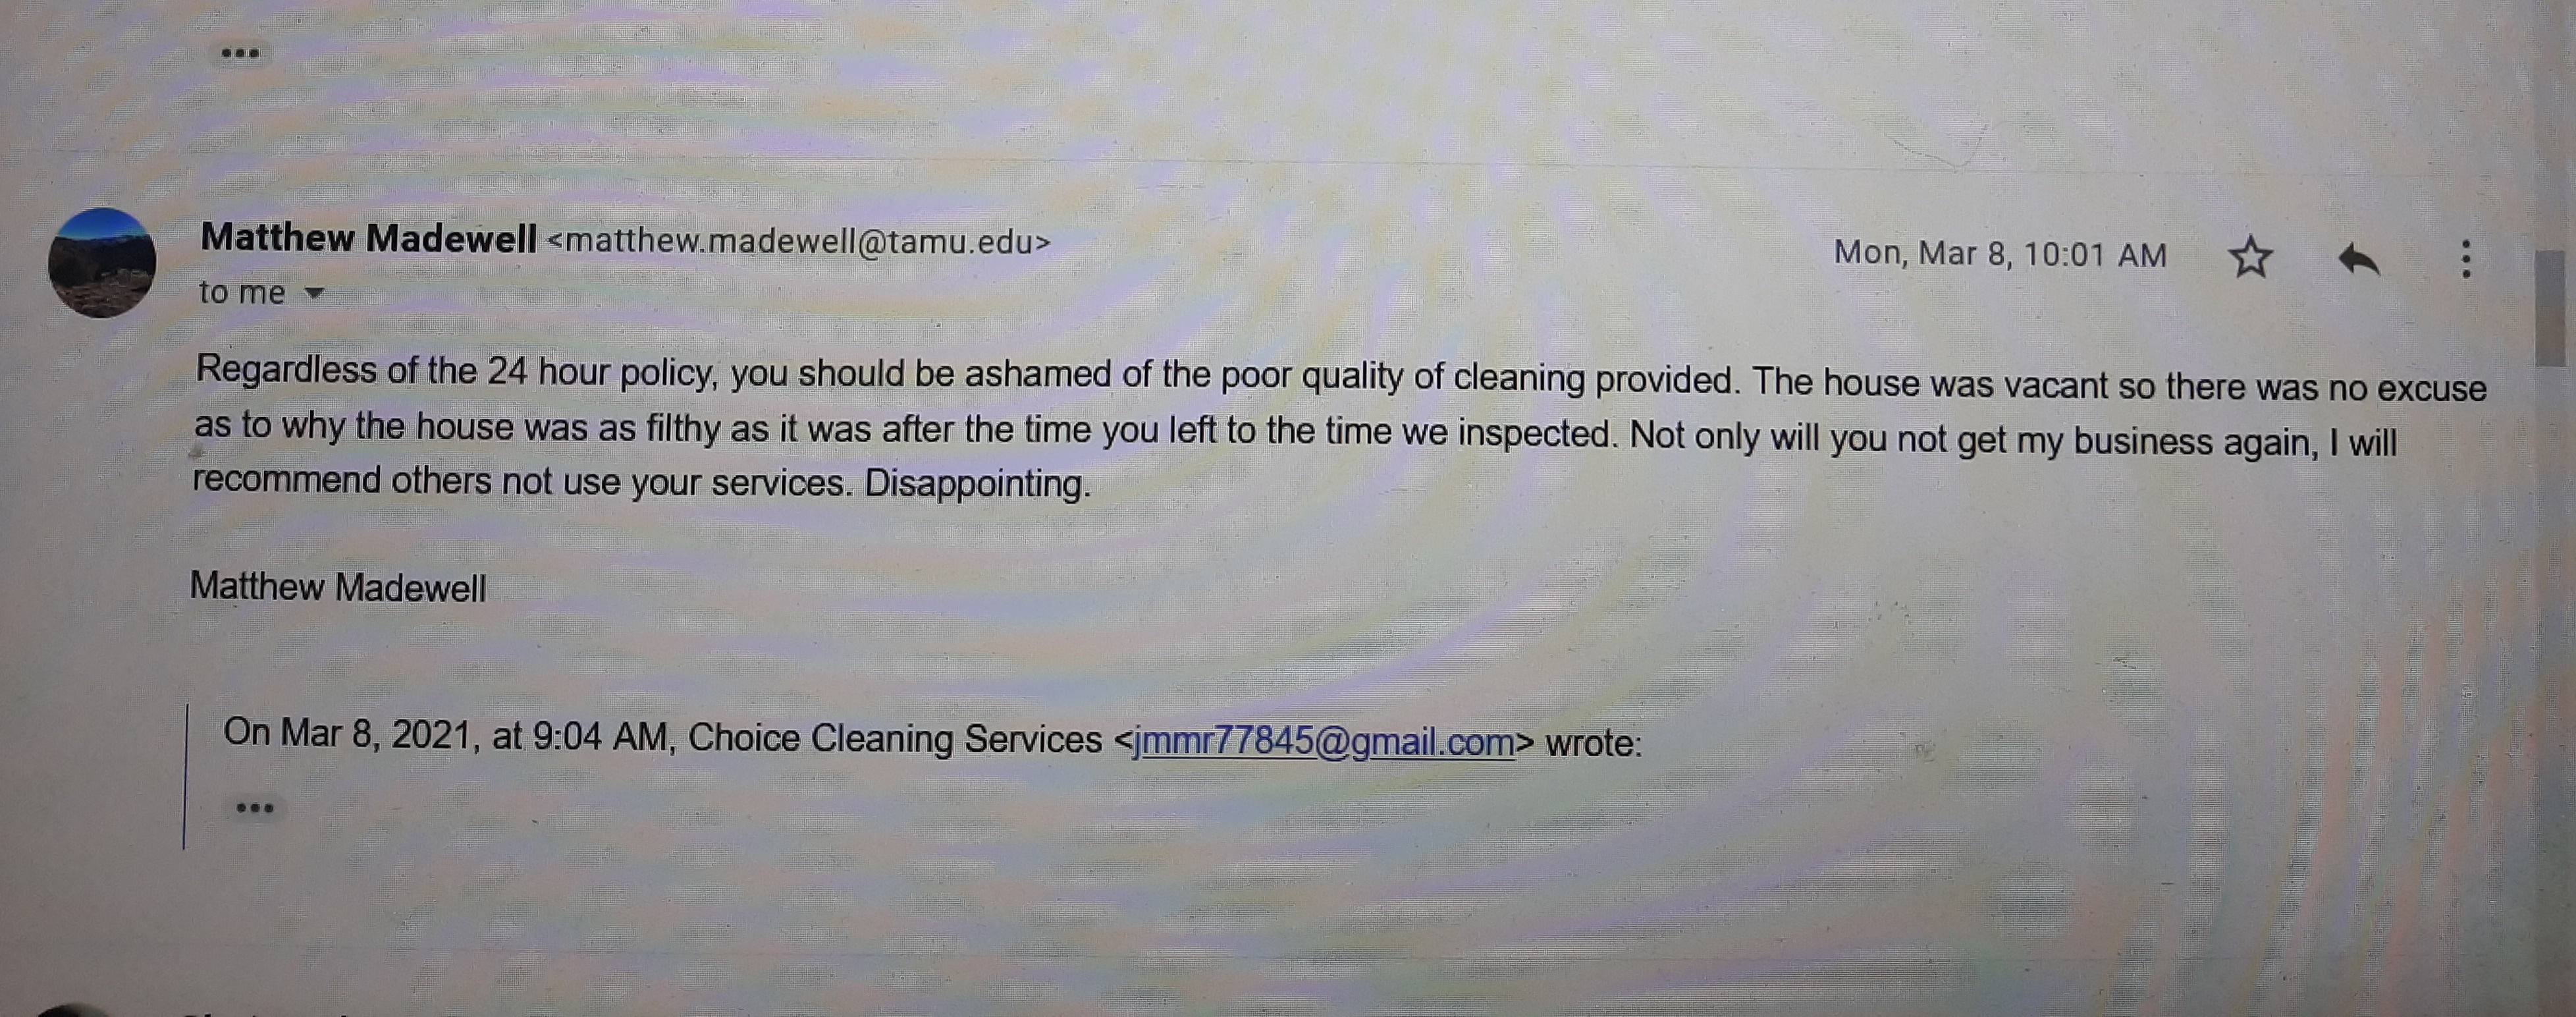 Final email threatening to disparage our Company